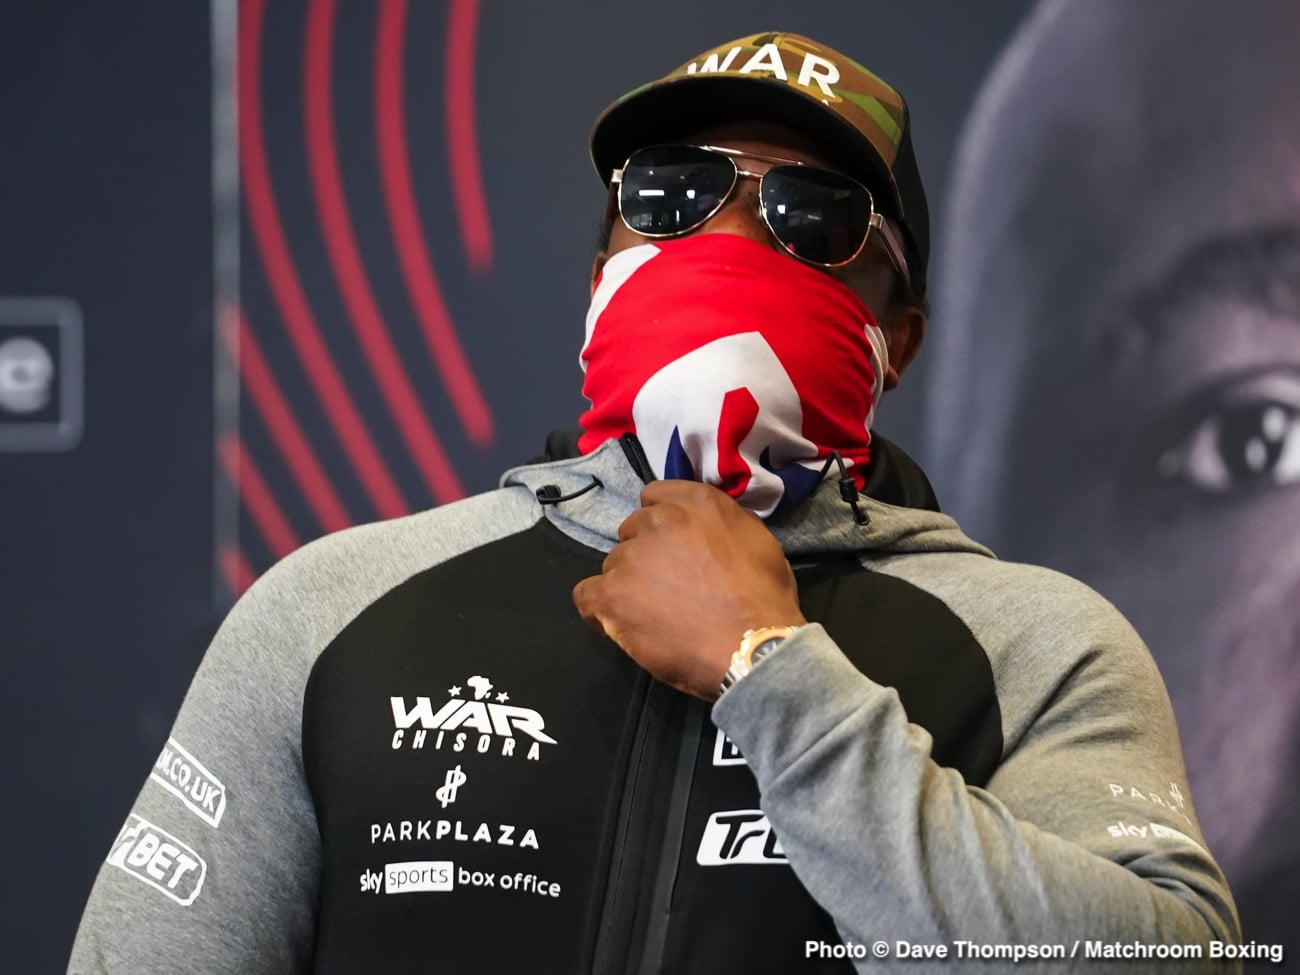 Chisora On Wilder: "We've Both Come Out Of Two Losses, Back-To-Back – I Will Beat Him"